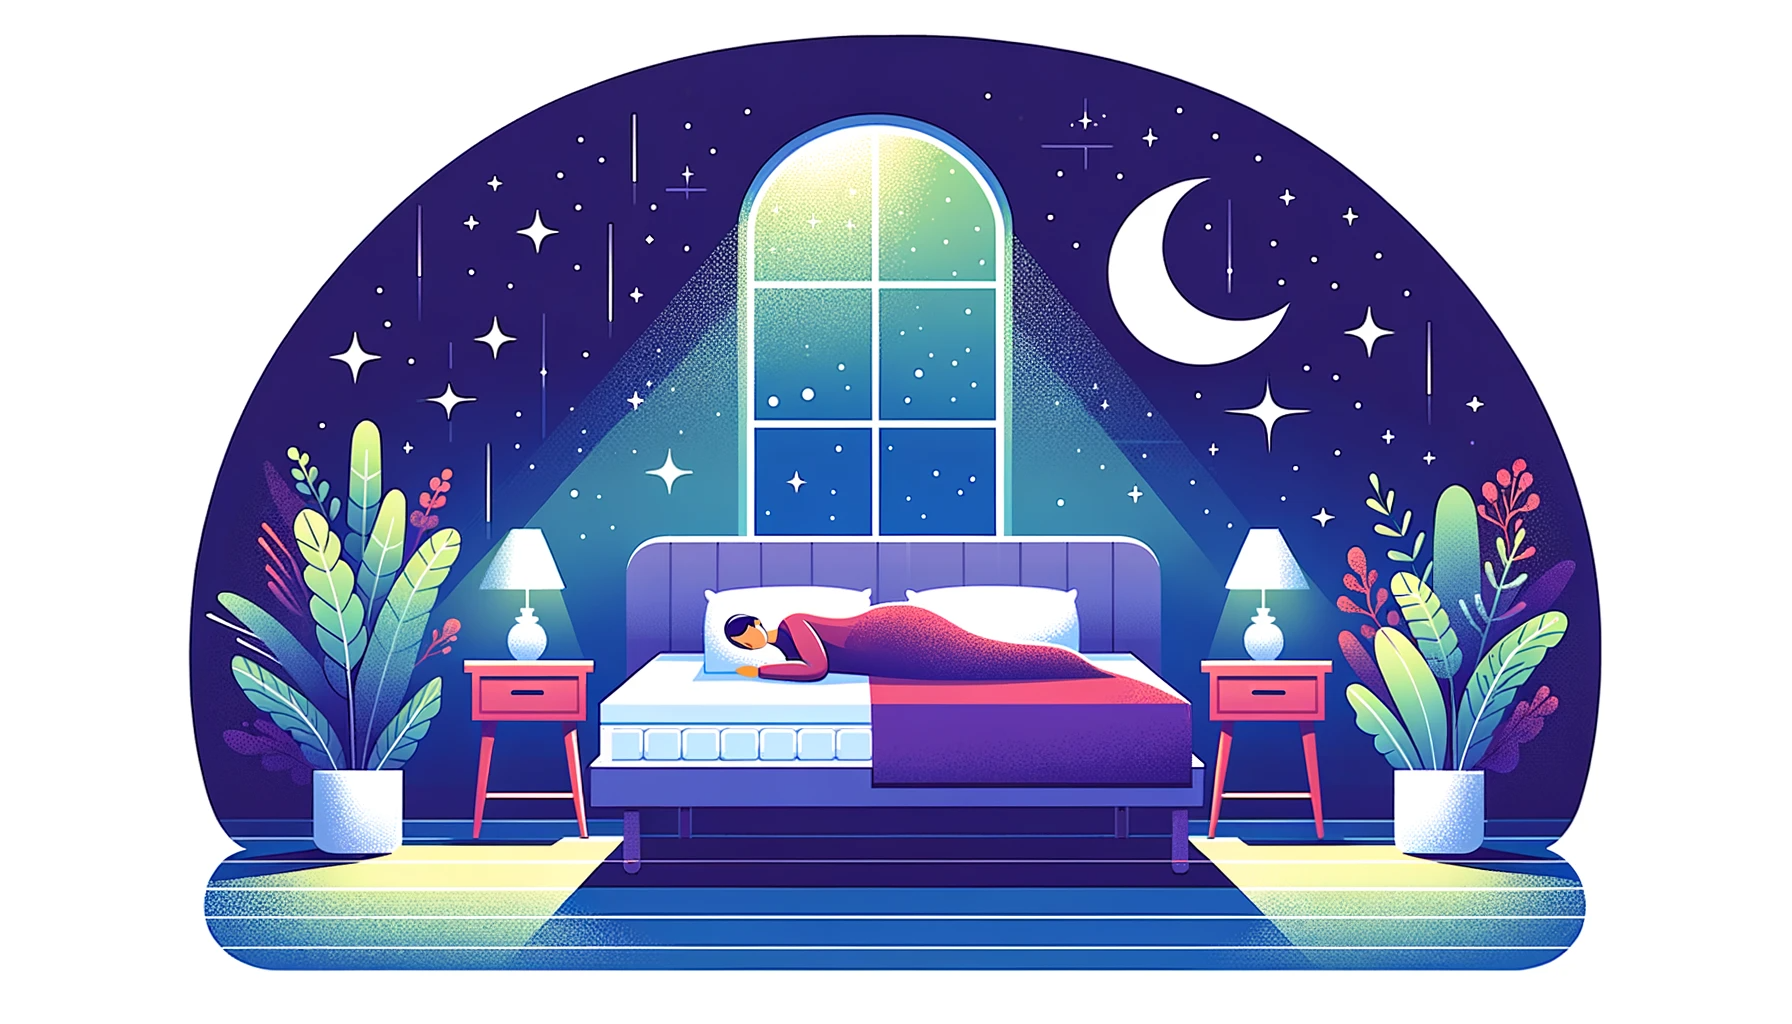 16:9 colorful vector illustration of a serene bedroom at night. A person is comfortably resting on a custom mattress, with a dreamy atmosphere. Stars and moonlight gently illuminate the room, symbolizing a peaceful night's sleep after a fulfilling custom mattress experience.